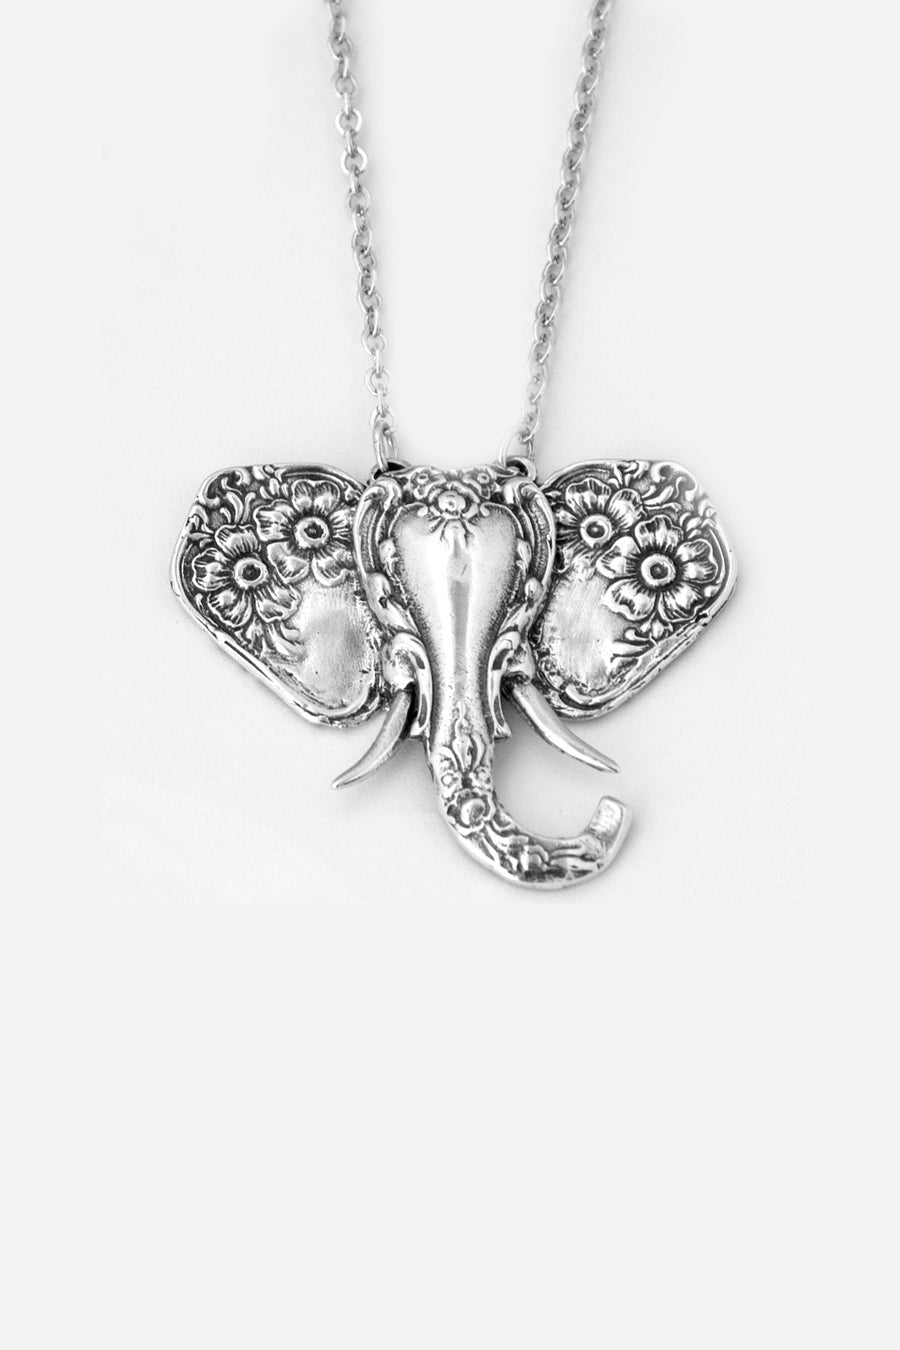 Elephant Sterling Silver Necklace - Silver Spoon Jewelry